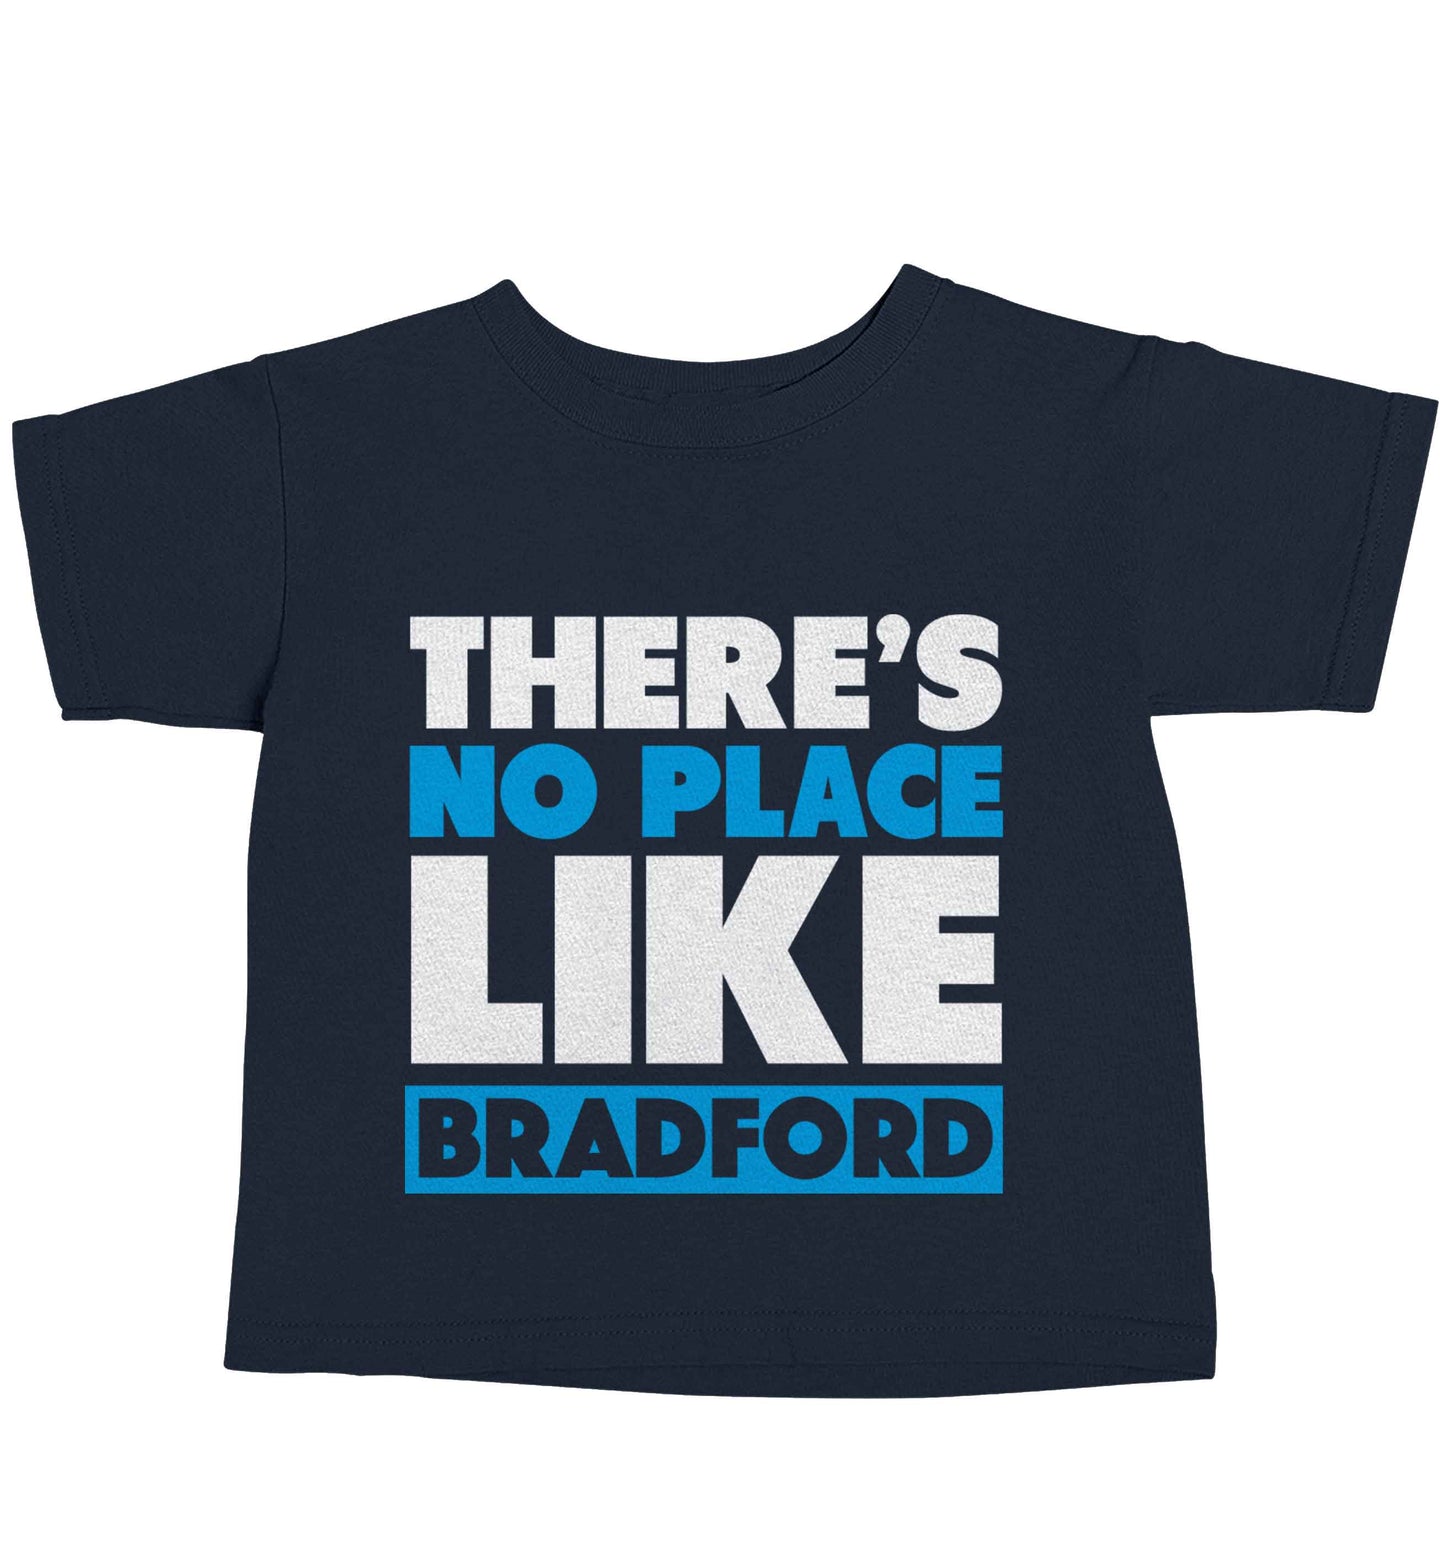 There's no place like Bradford navy baby toddler Tshirt 2 Years